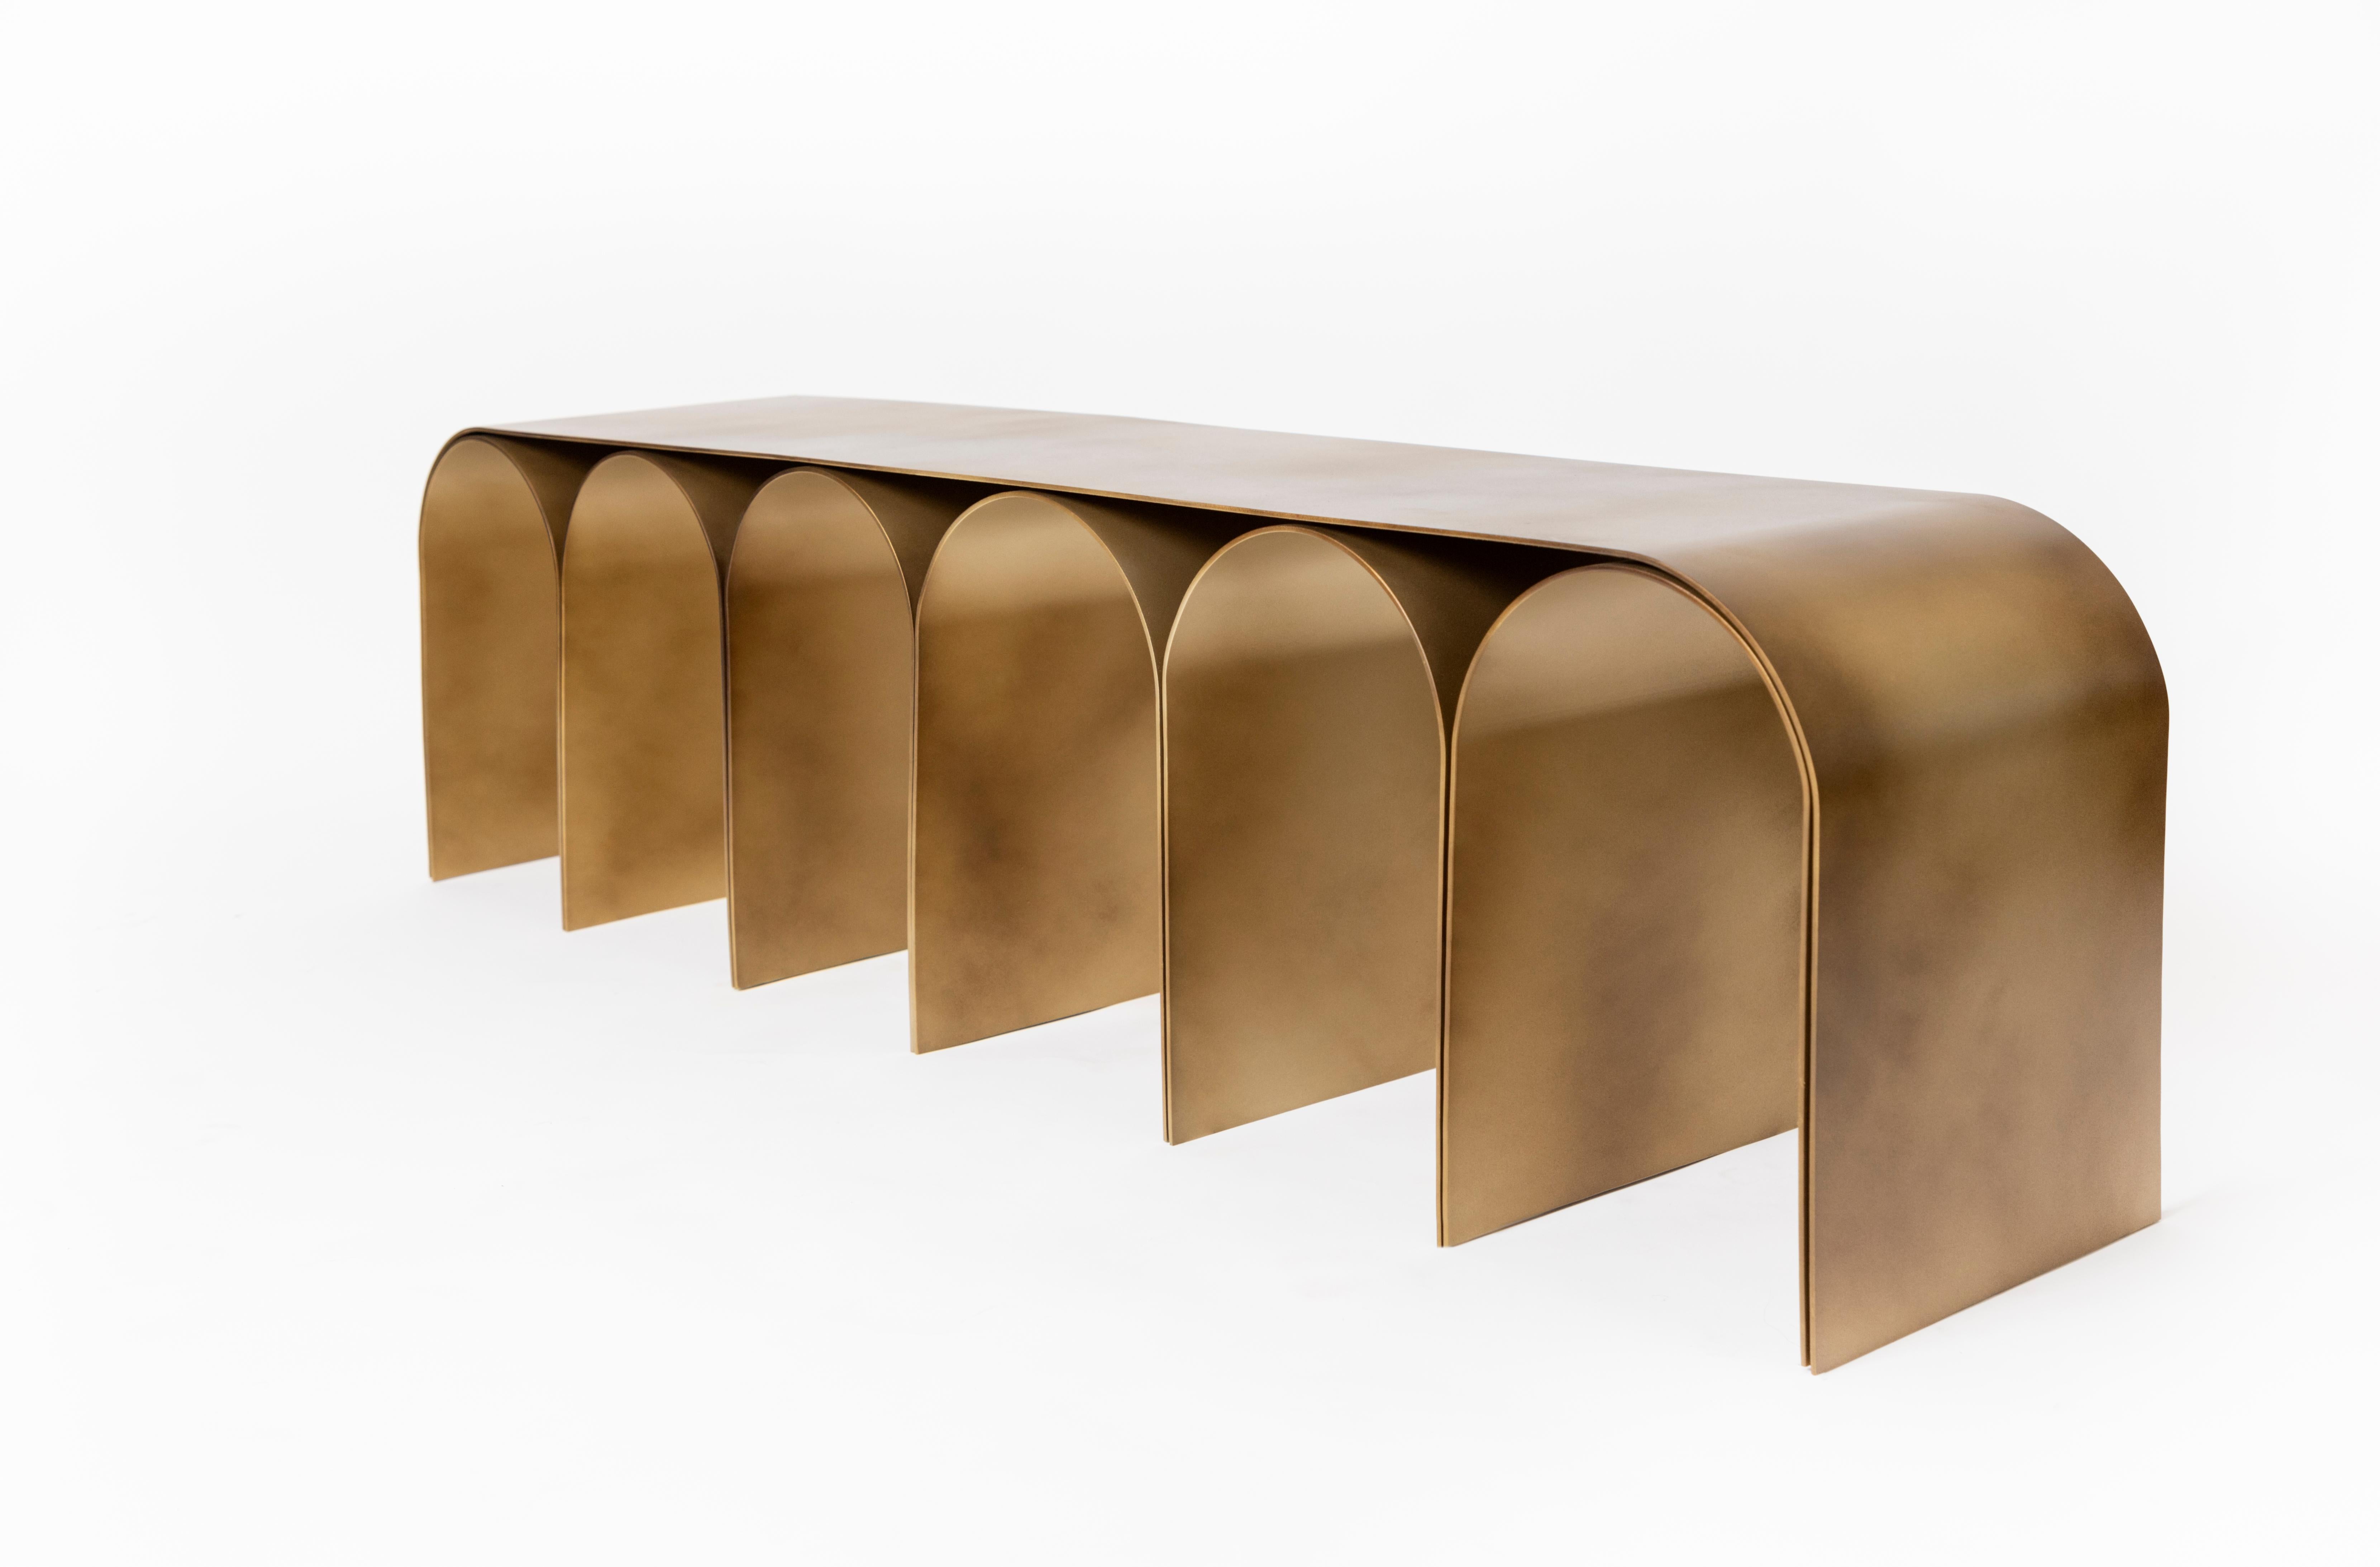 Steel gold arch bench by Pietro Franceschini.
Sold exclusively by Galerie Philia.
Materials: Steel.
Finishes available: Brass finish, satin, blackened.
Dimensions: W 155 x L 33 x 43cm.
Manufacturer: Prinzivalli.

Available finishes:
Steel